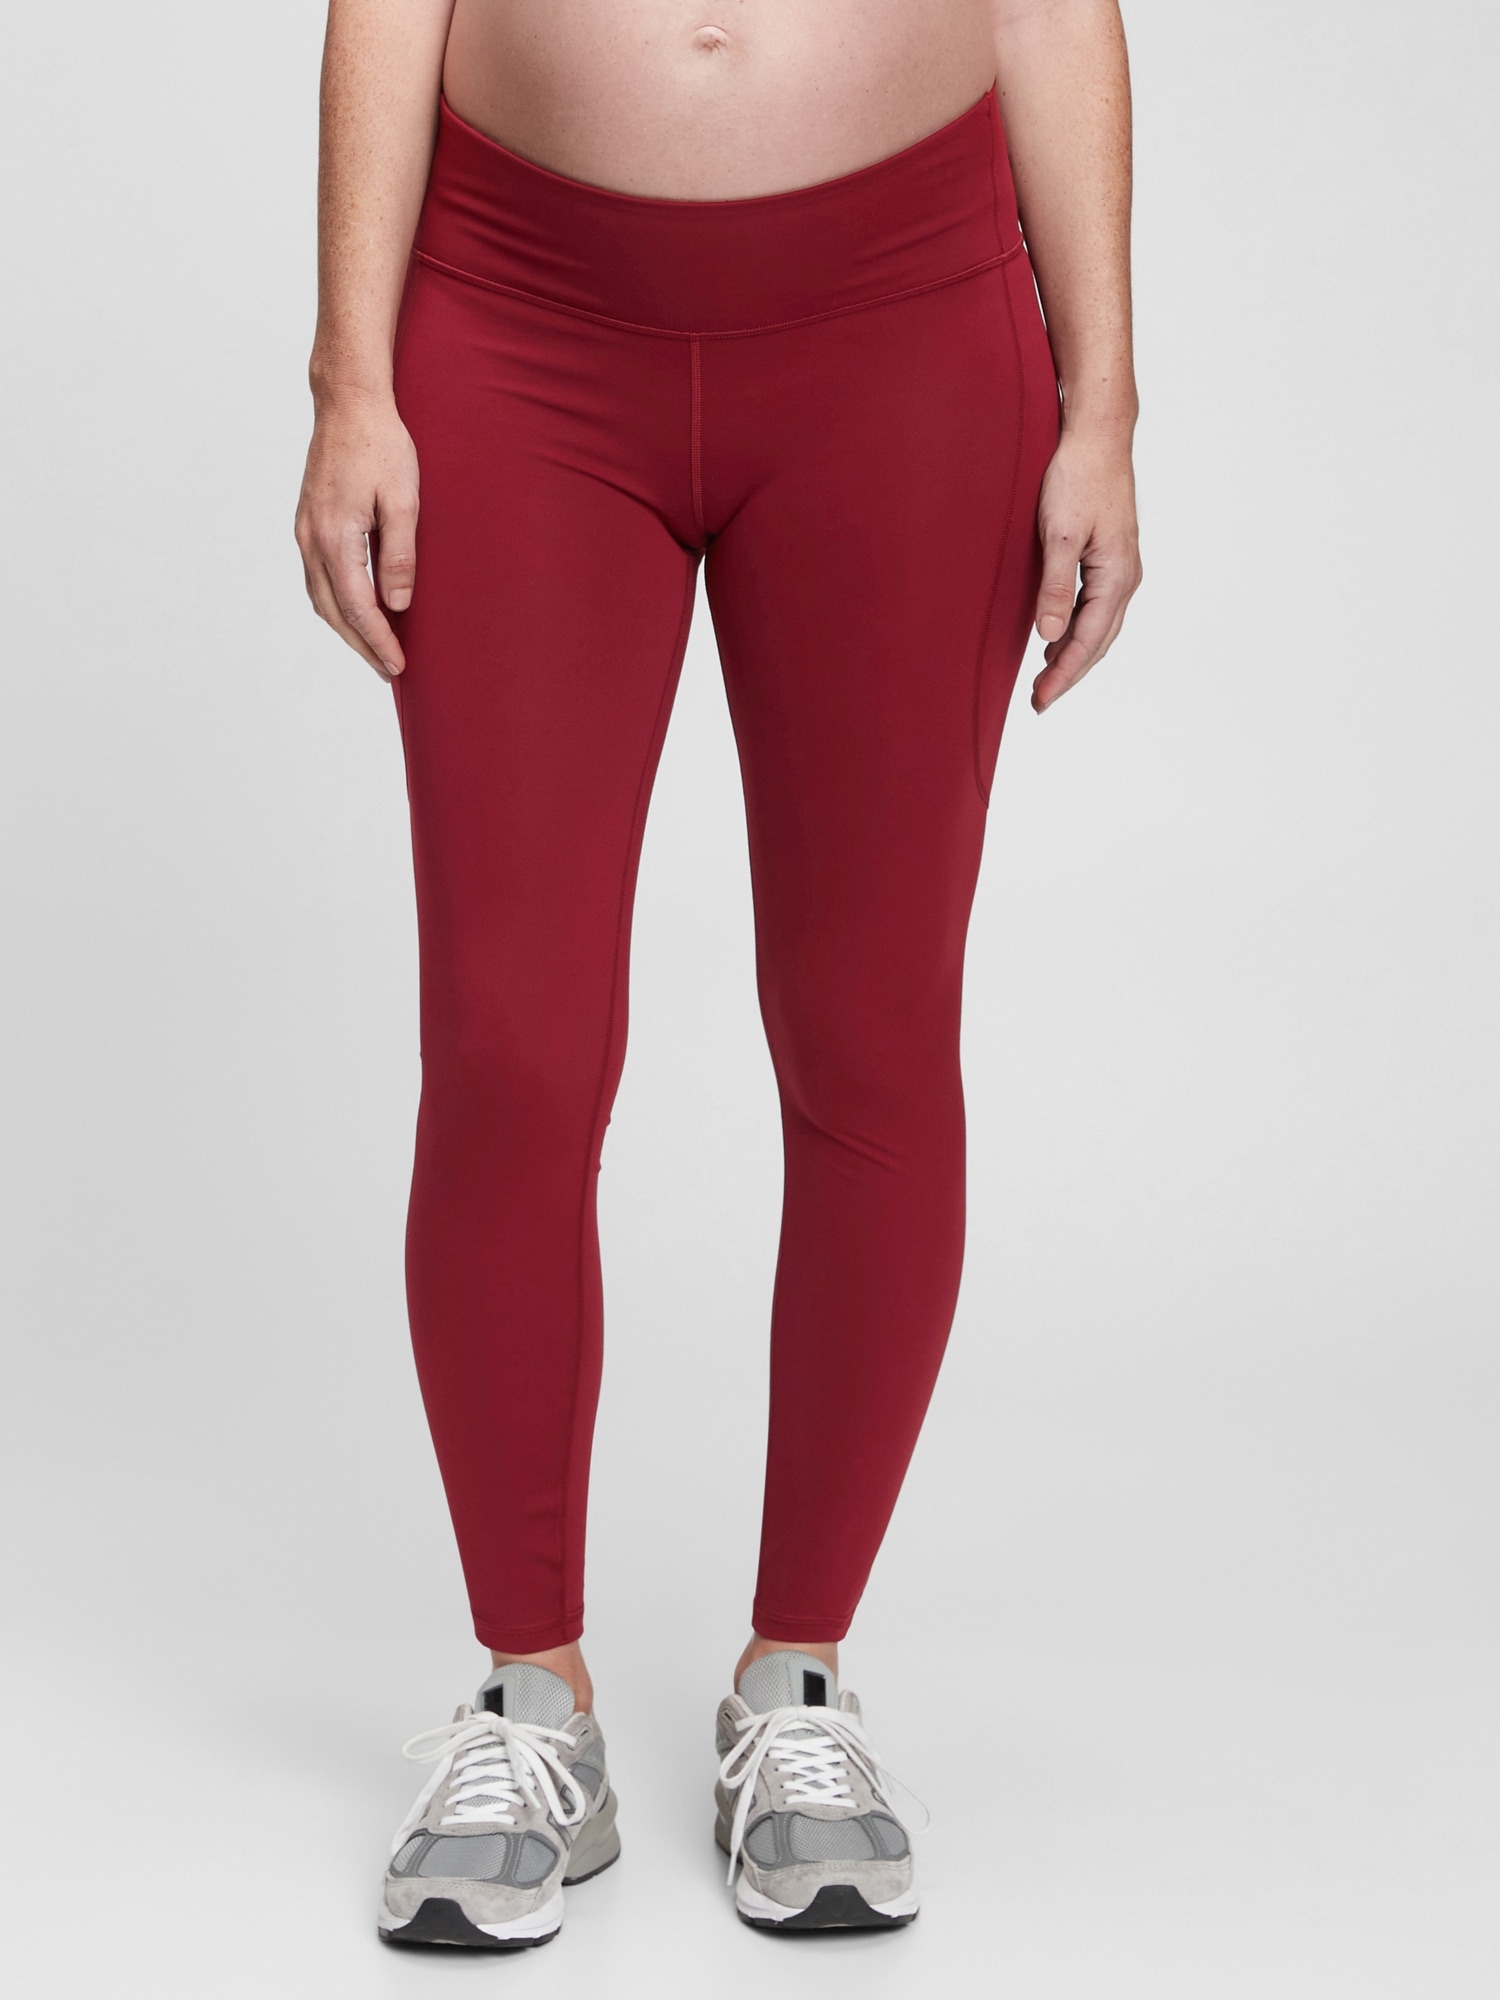 Gap Maternity Recycled Under Belly 7/8 Power Leggings In Red Delicious